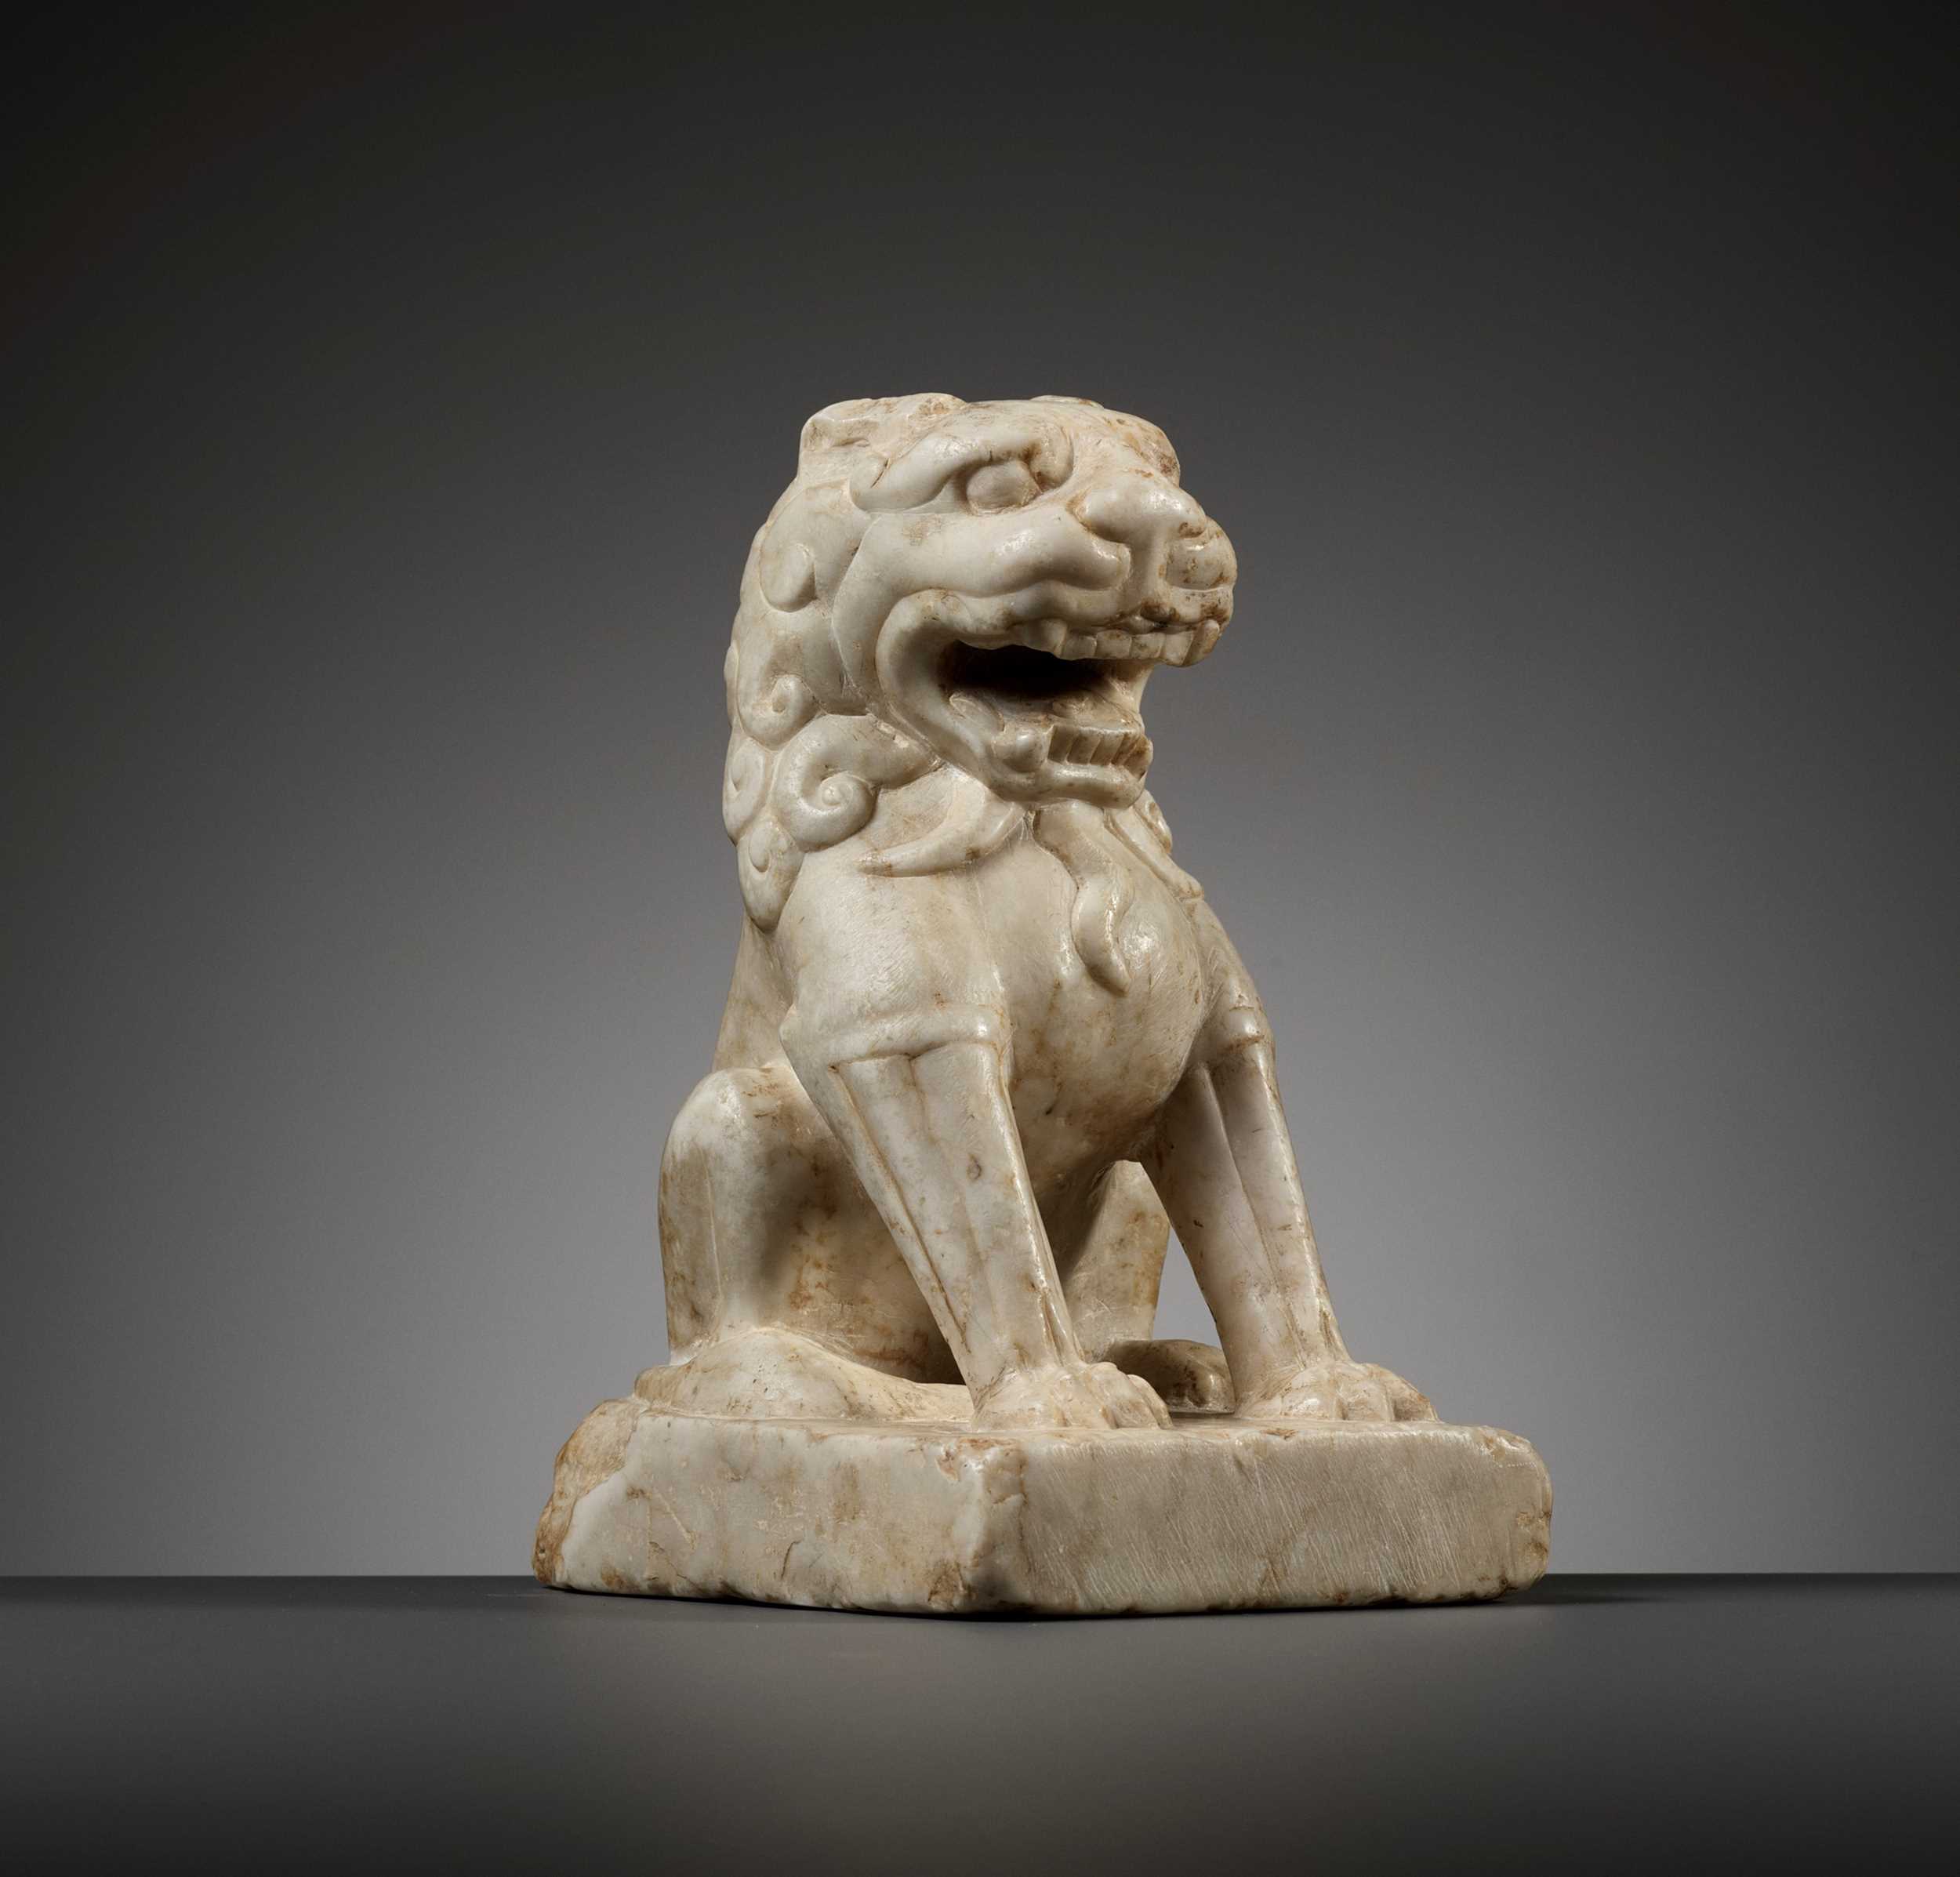 † A SMALL WHITE MARBLE FIGURE OF A LION, TANG DYNASTY 唐代小漢白玉獅